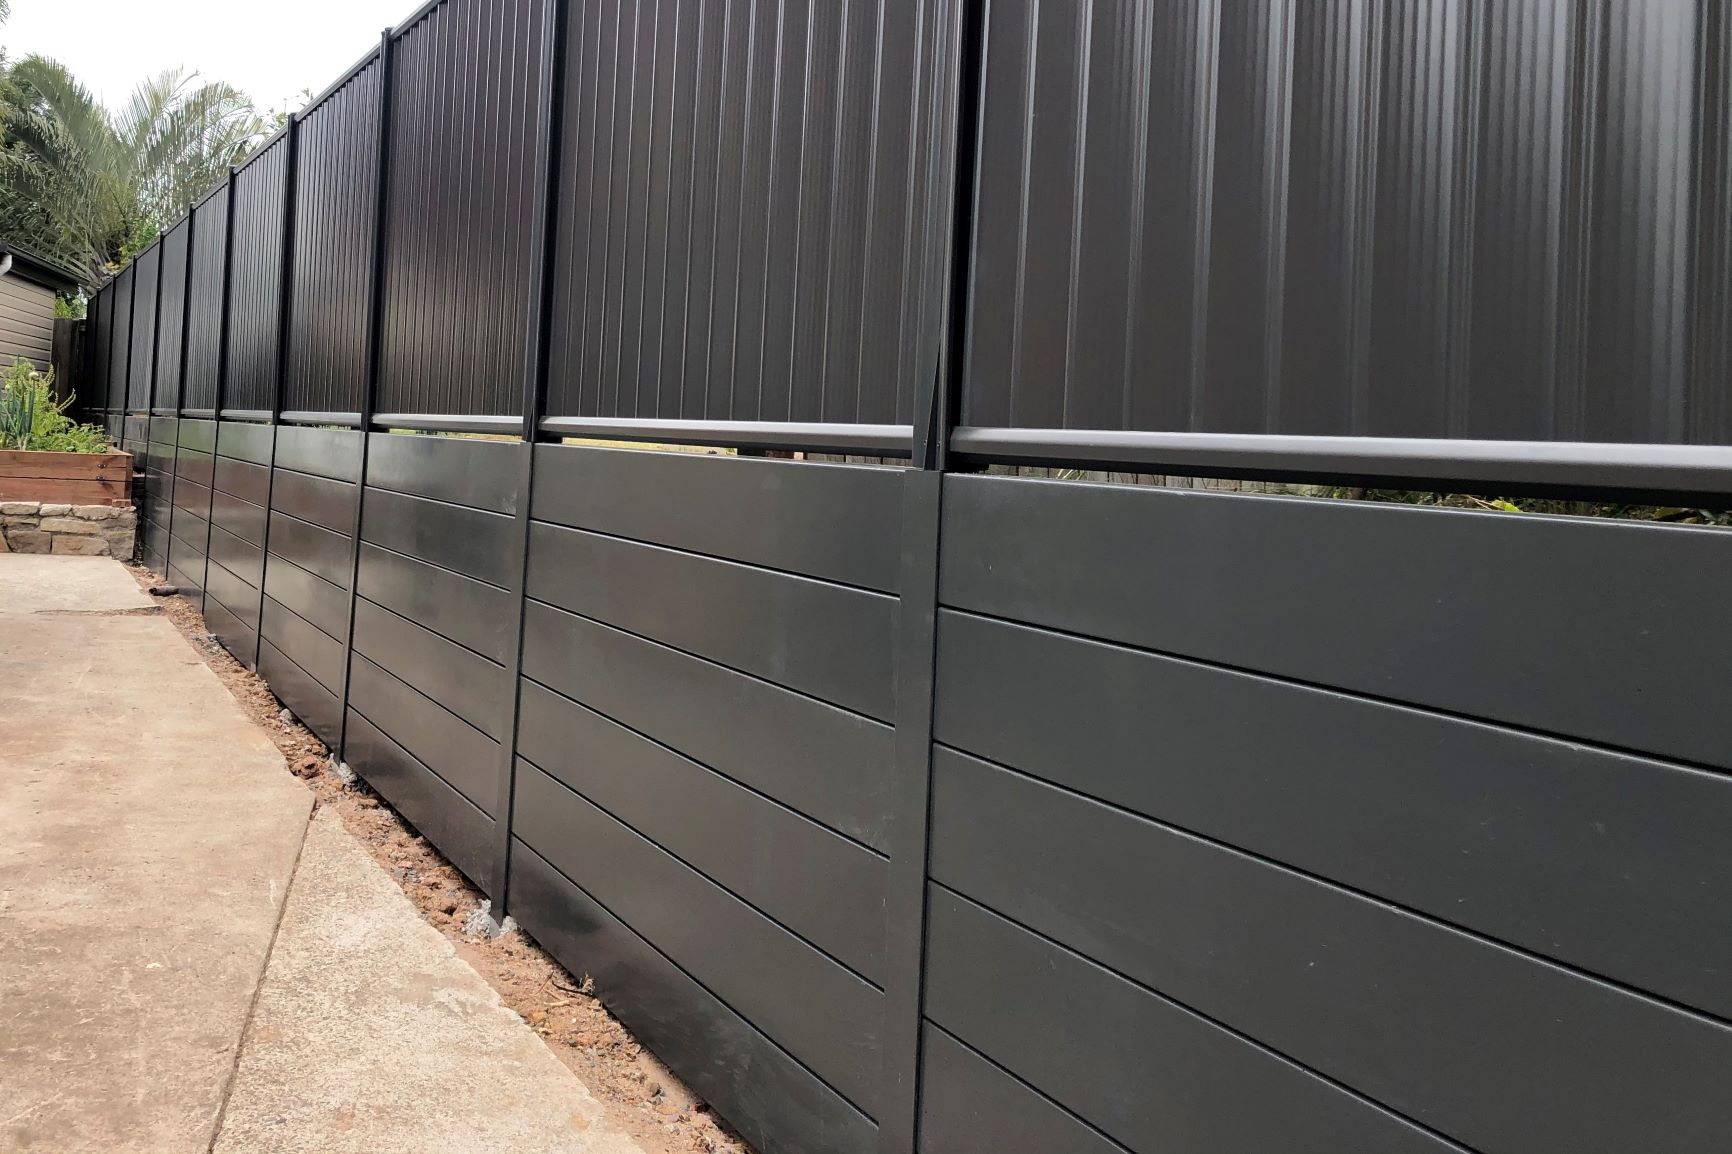 Durawall retaining wall monument and colorbond in Carindale featured image